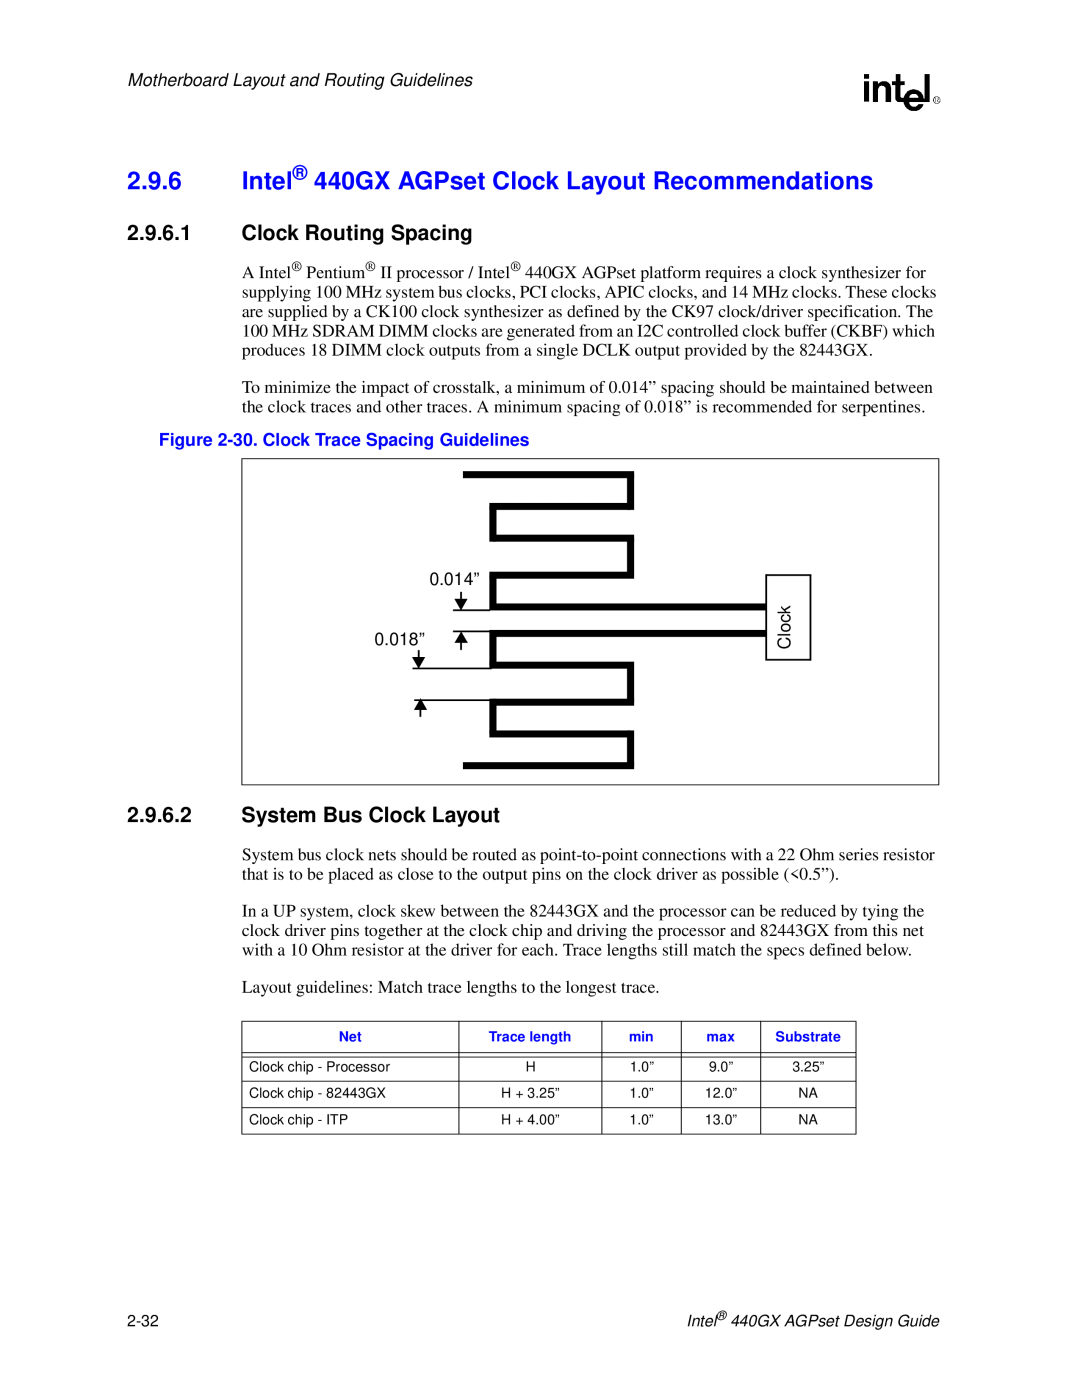 Intel manual Intel 440GX AGPset Clock Layout Recommendations, Clock Routing Spacing, System Bus Clock Layout 